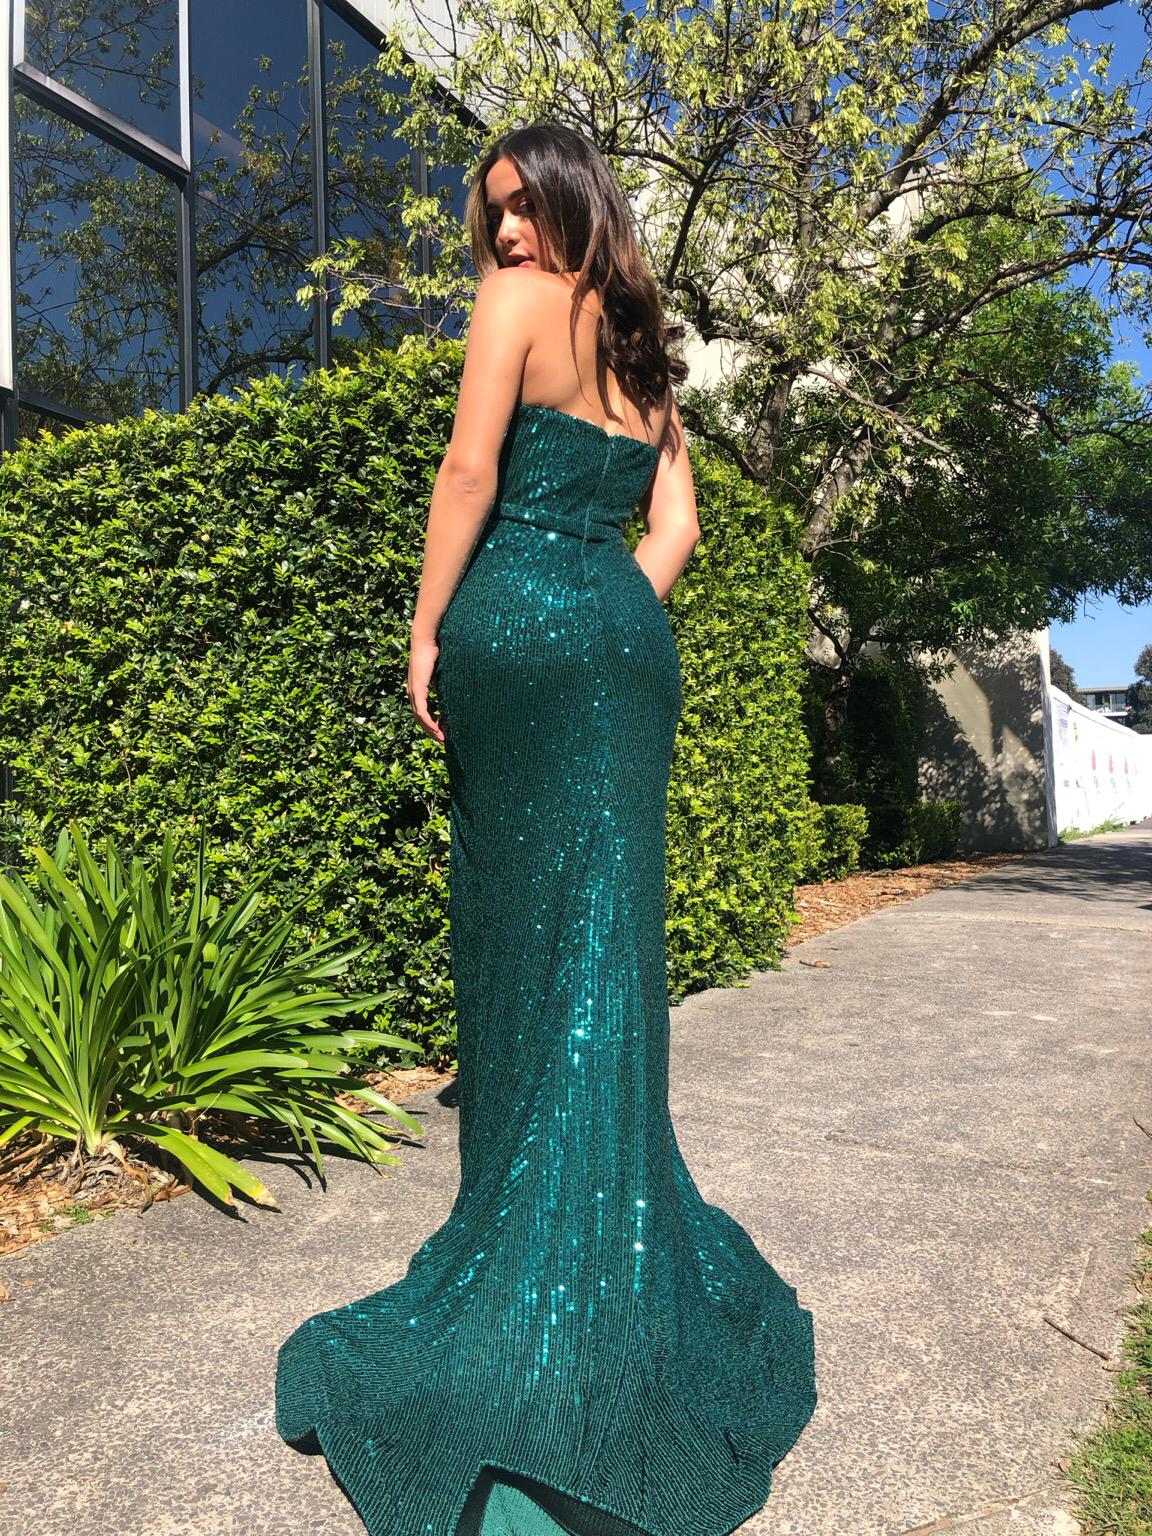 Tina Holly Couture TA823 Emerald Green Sequin Strapless Mermaid Formal Dress Tina Holly Couture$ AfterPay Humm ZipPay LayBuy Sezzle